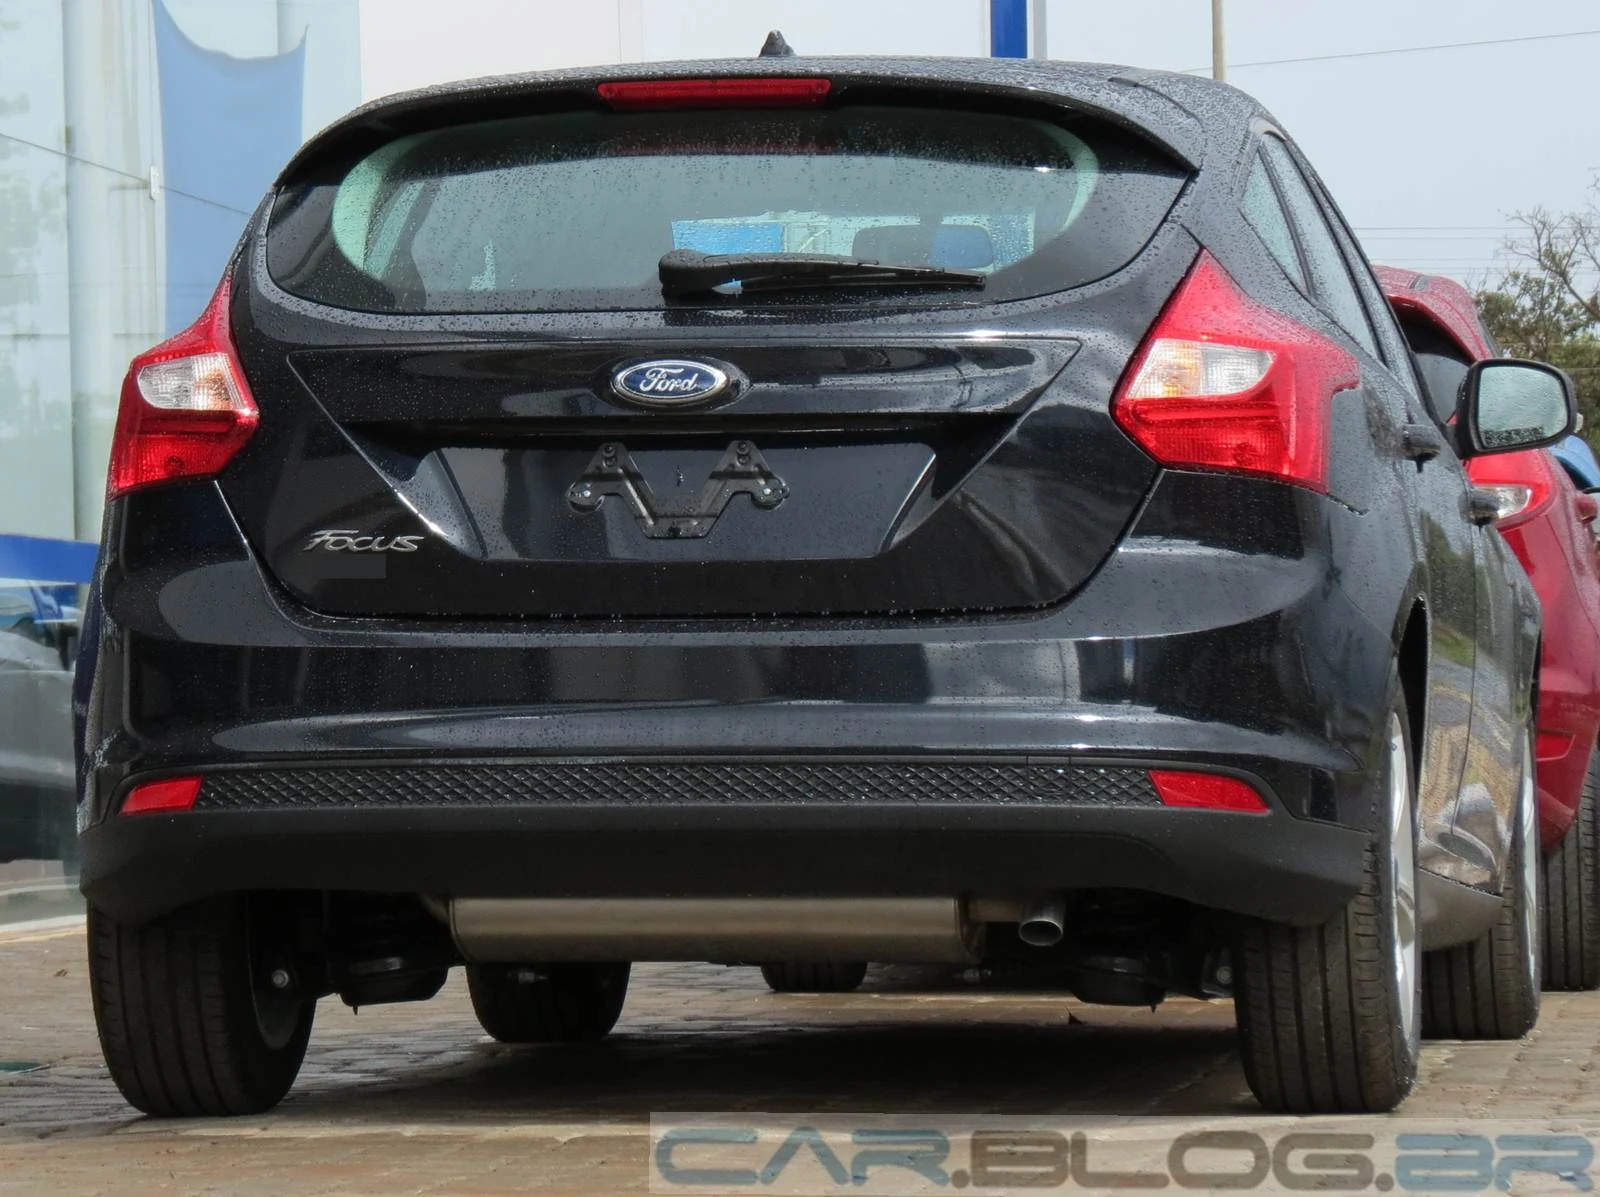 Ford Focus S 1.6 2015